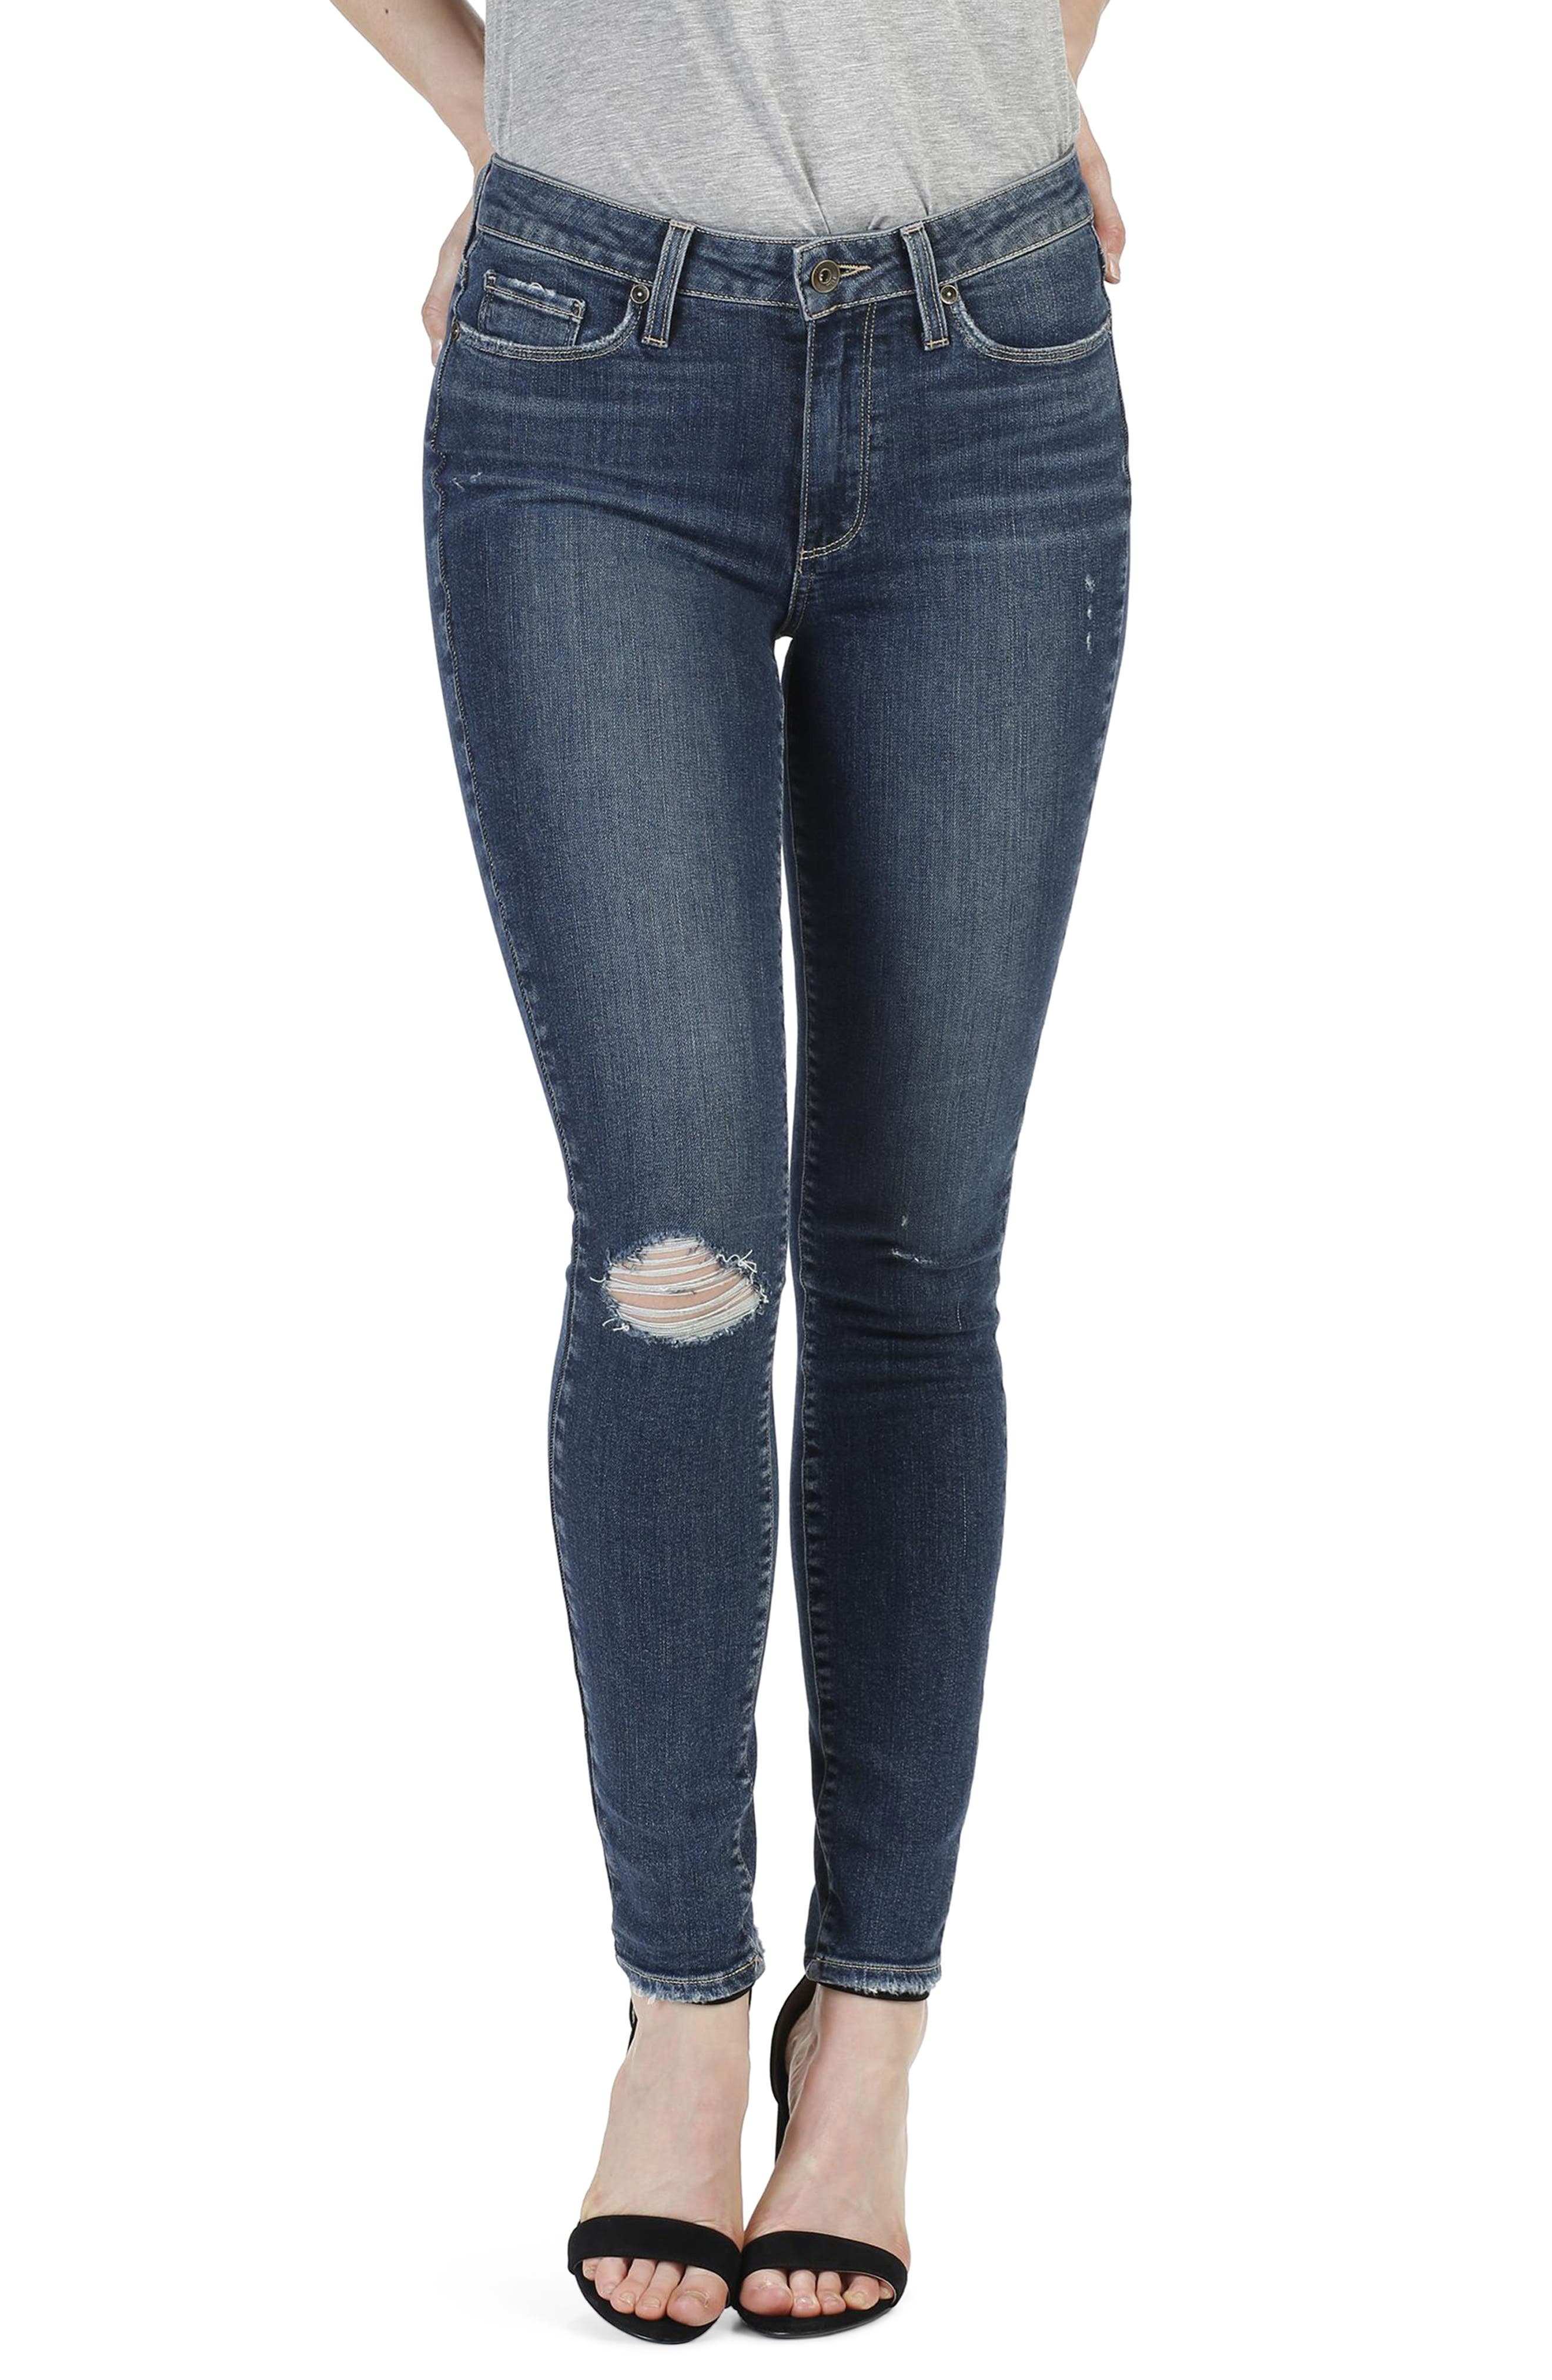 paige hoxton high rise ultra skinny